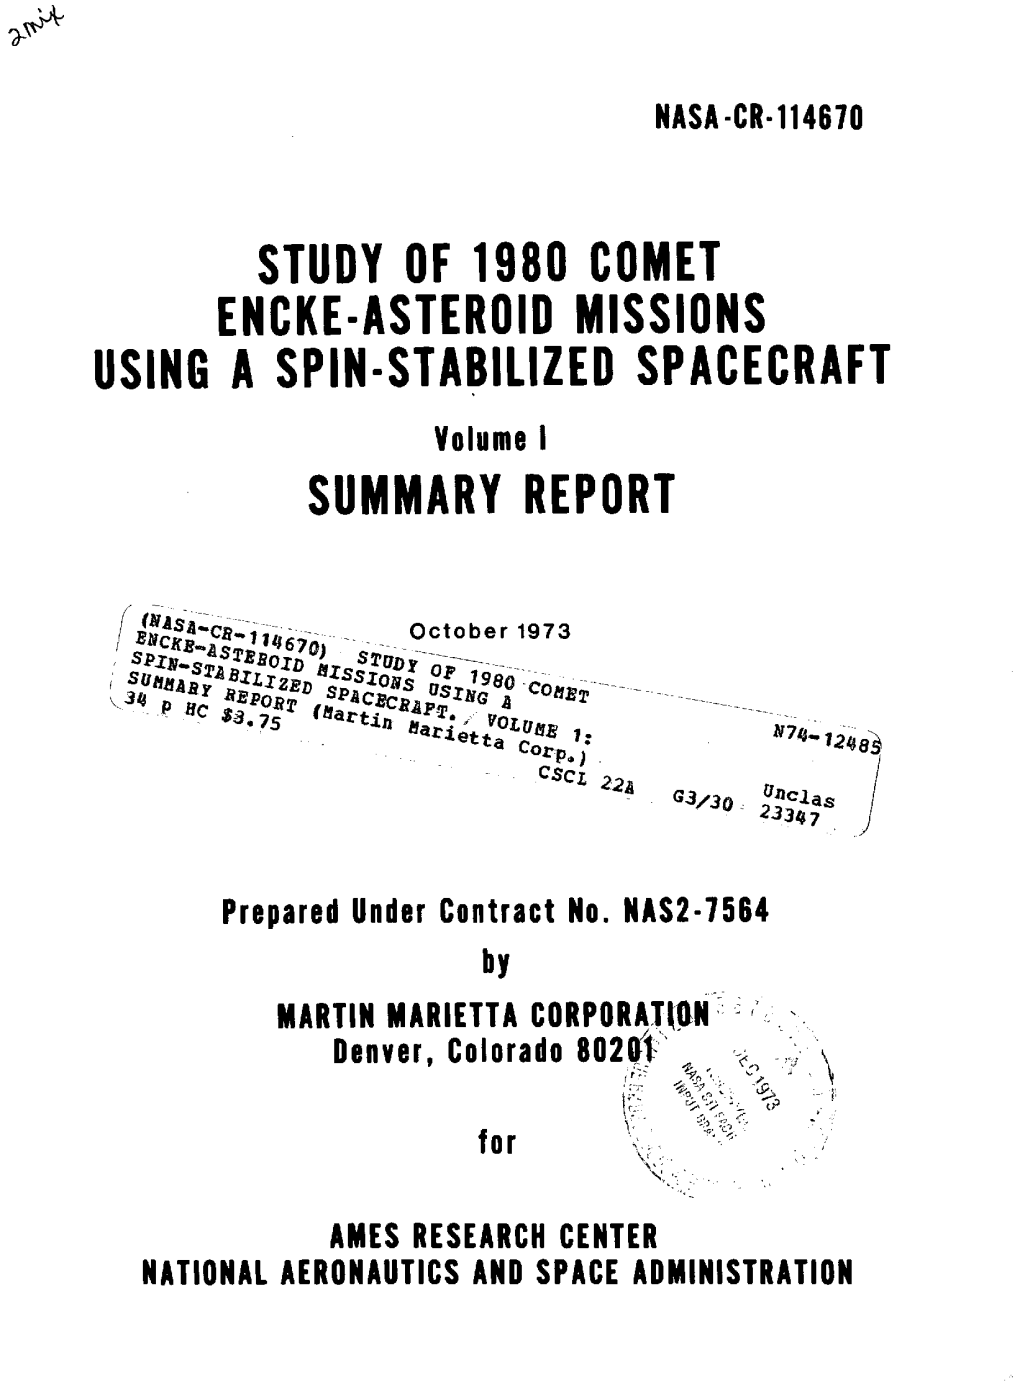 STUDY of 1980 COMET ENCKE-ASTEROID MISSIONS USING a SPIN-STABILIZED SPACECRAFT Volume I SUMMARY REPORT